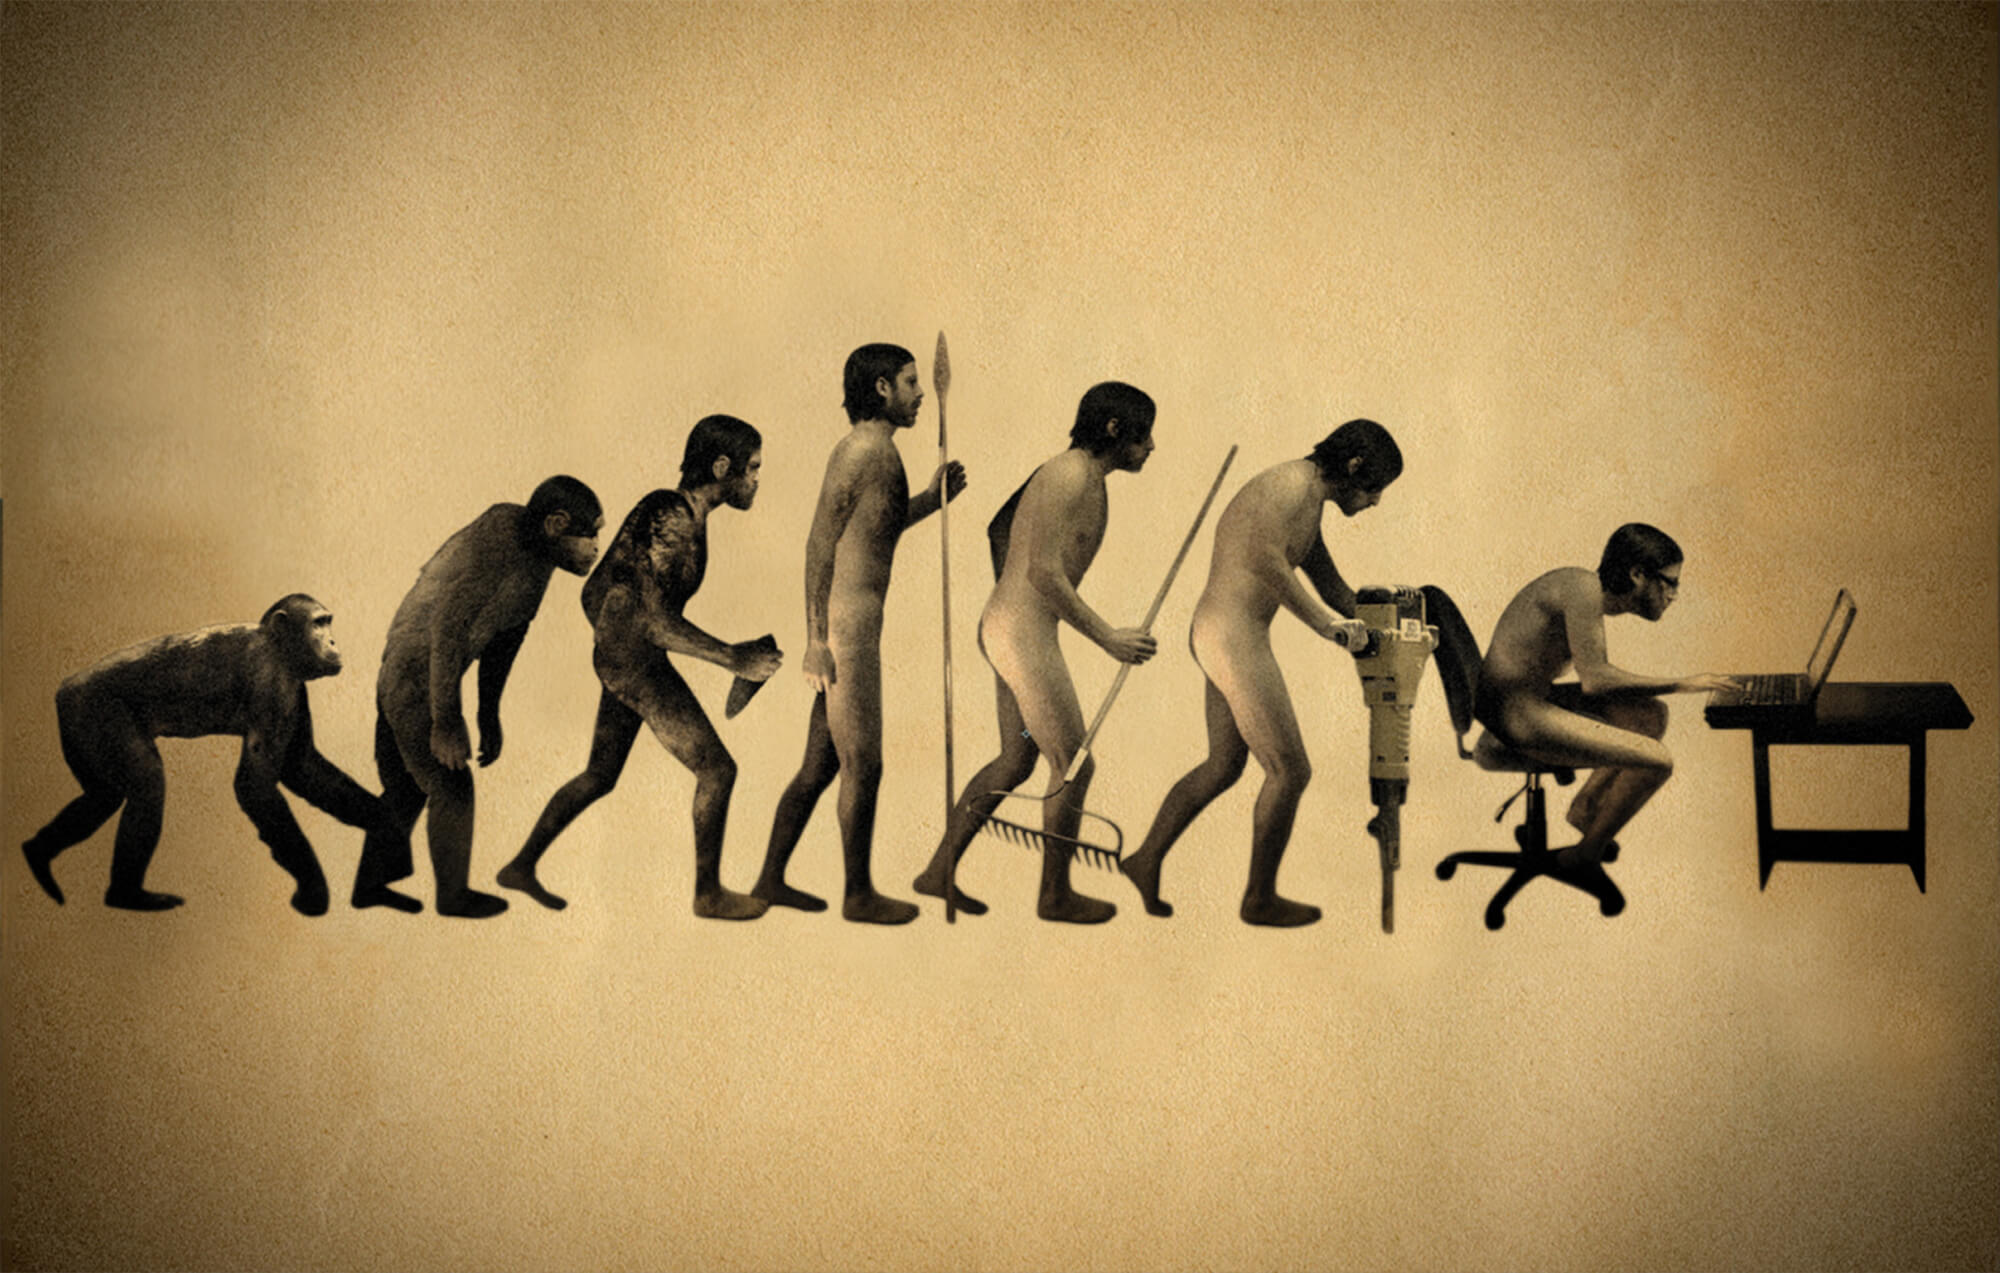 Illustration of the evolution of men, from the pre-historic age to working on a desk age.